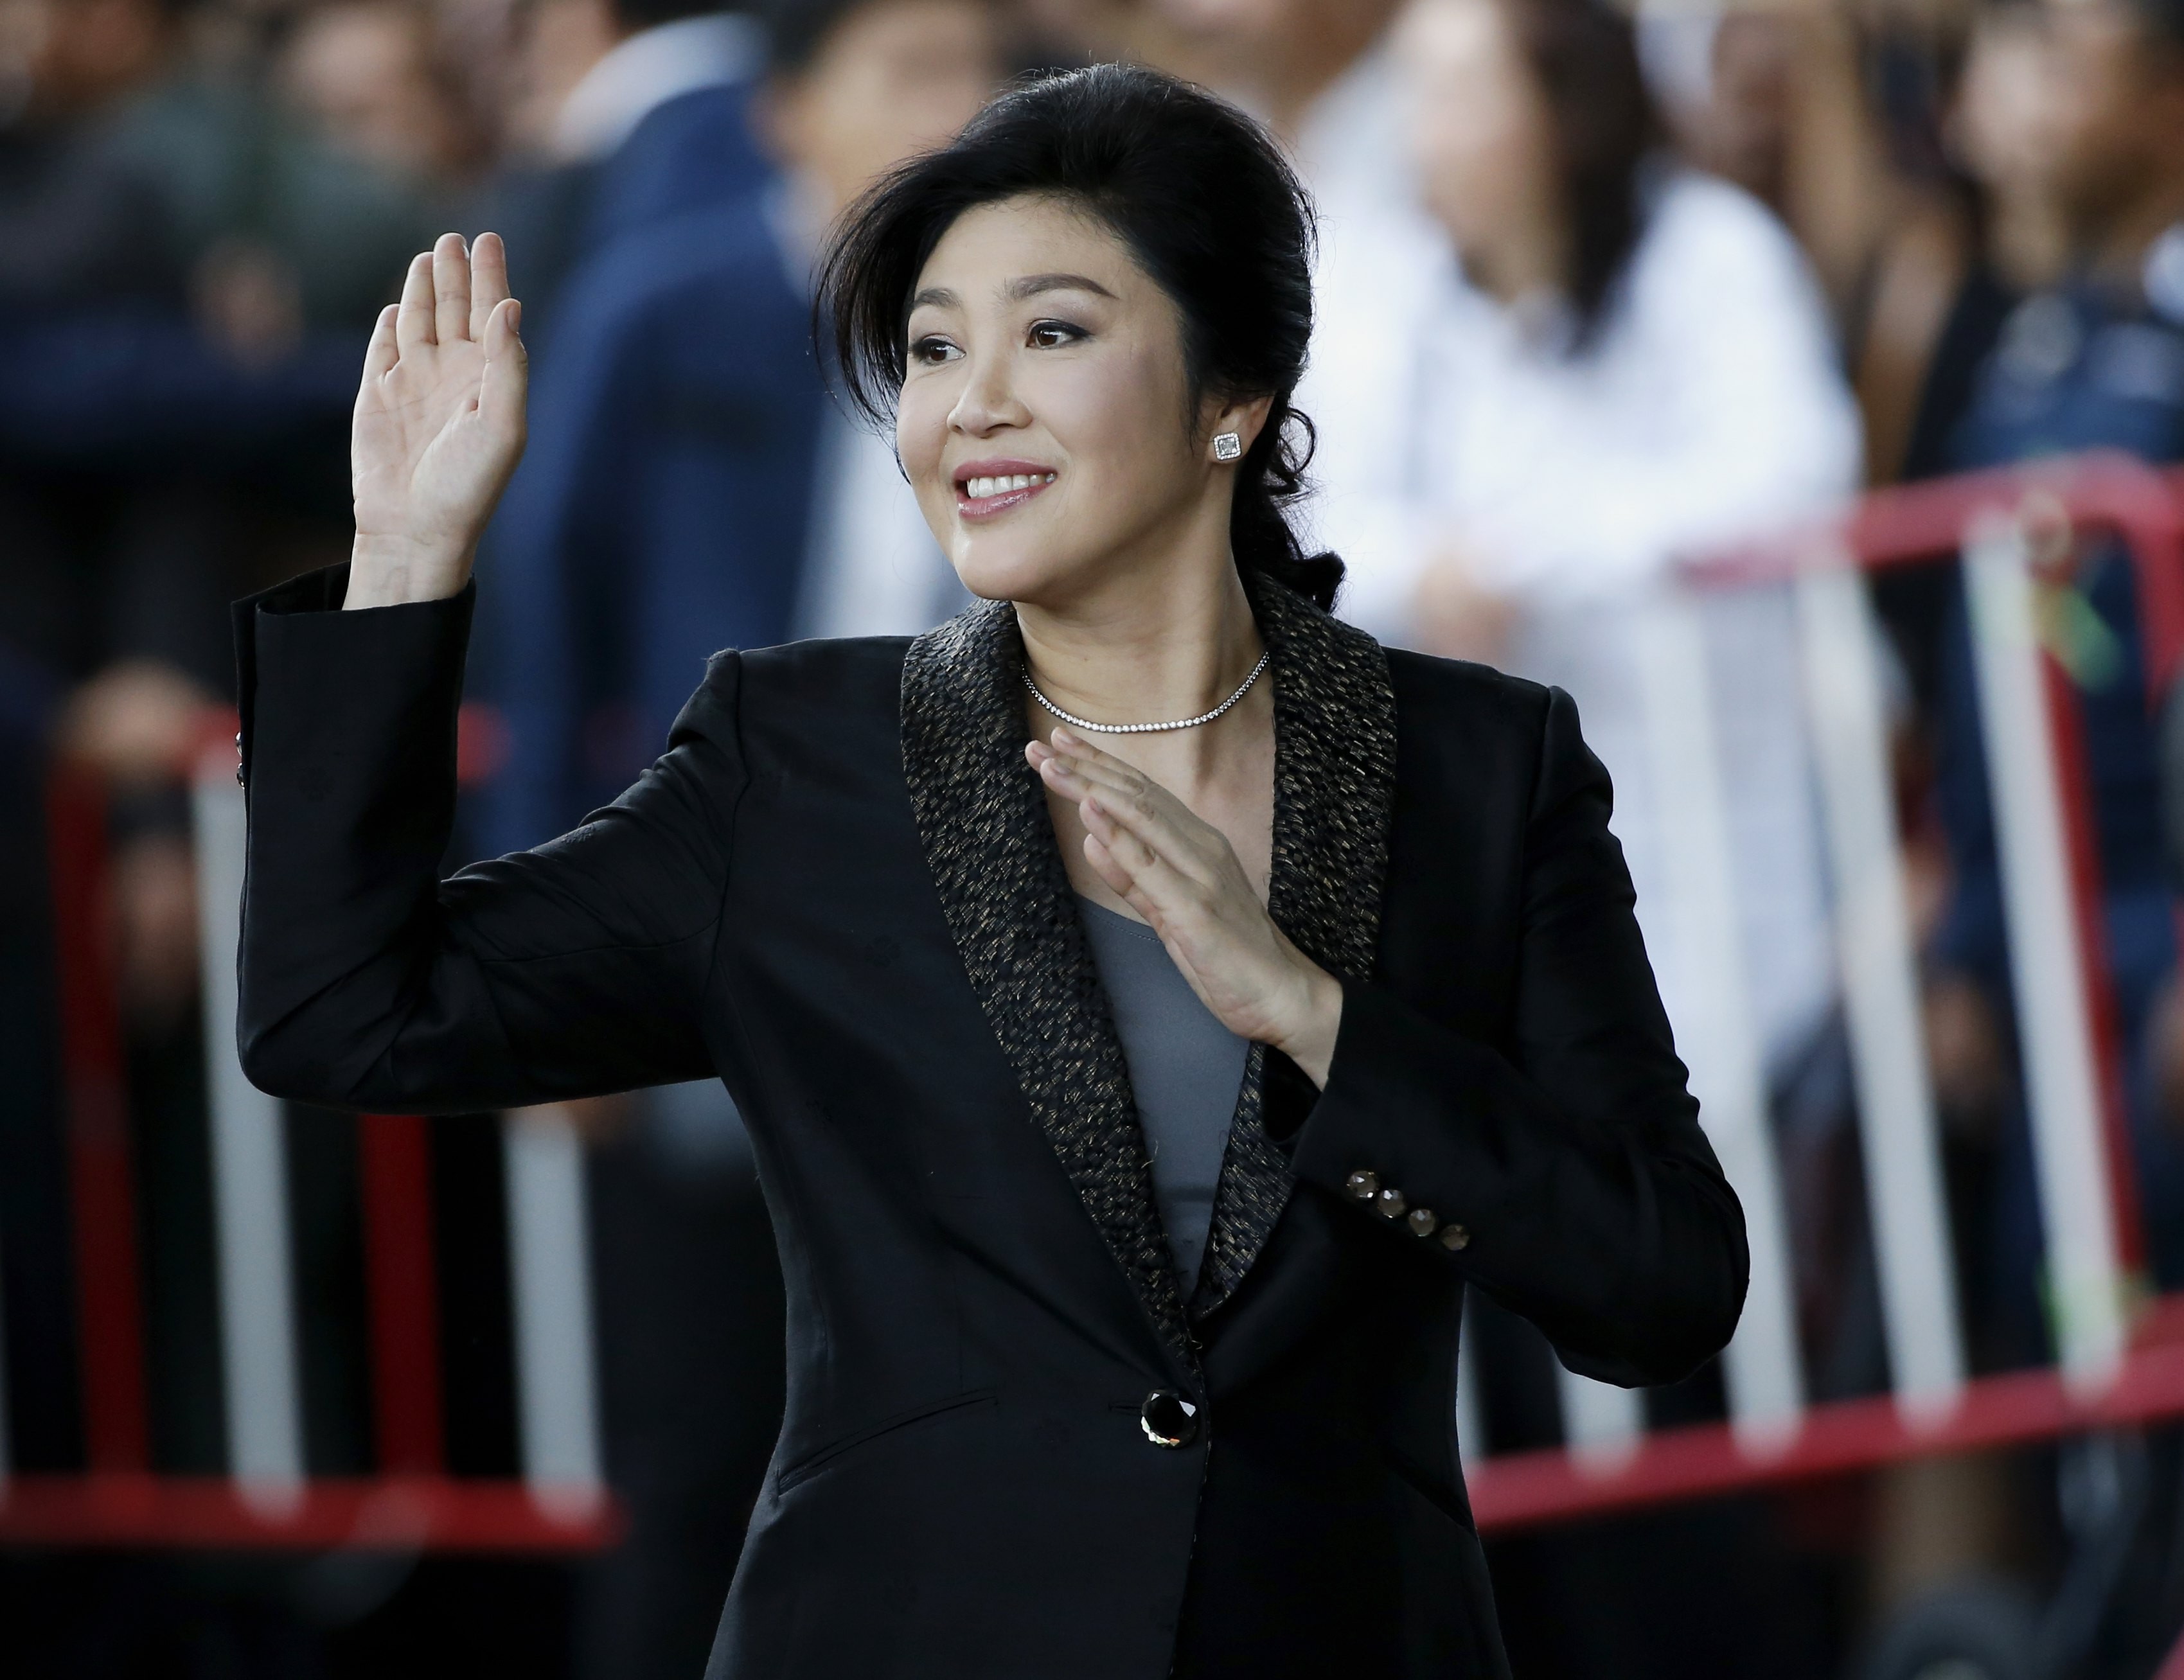 Yingluck Shinawatra waves to supporters as she arrives to deliver closing statements in her trial at the Supreme Court in Bangkok. Photo: EPA